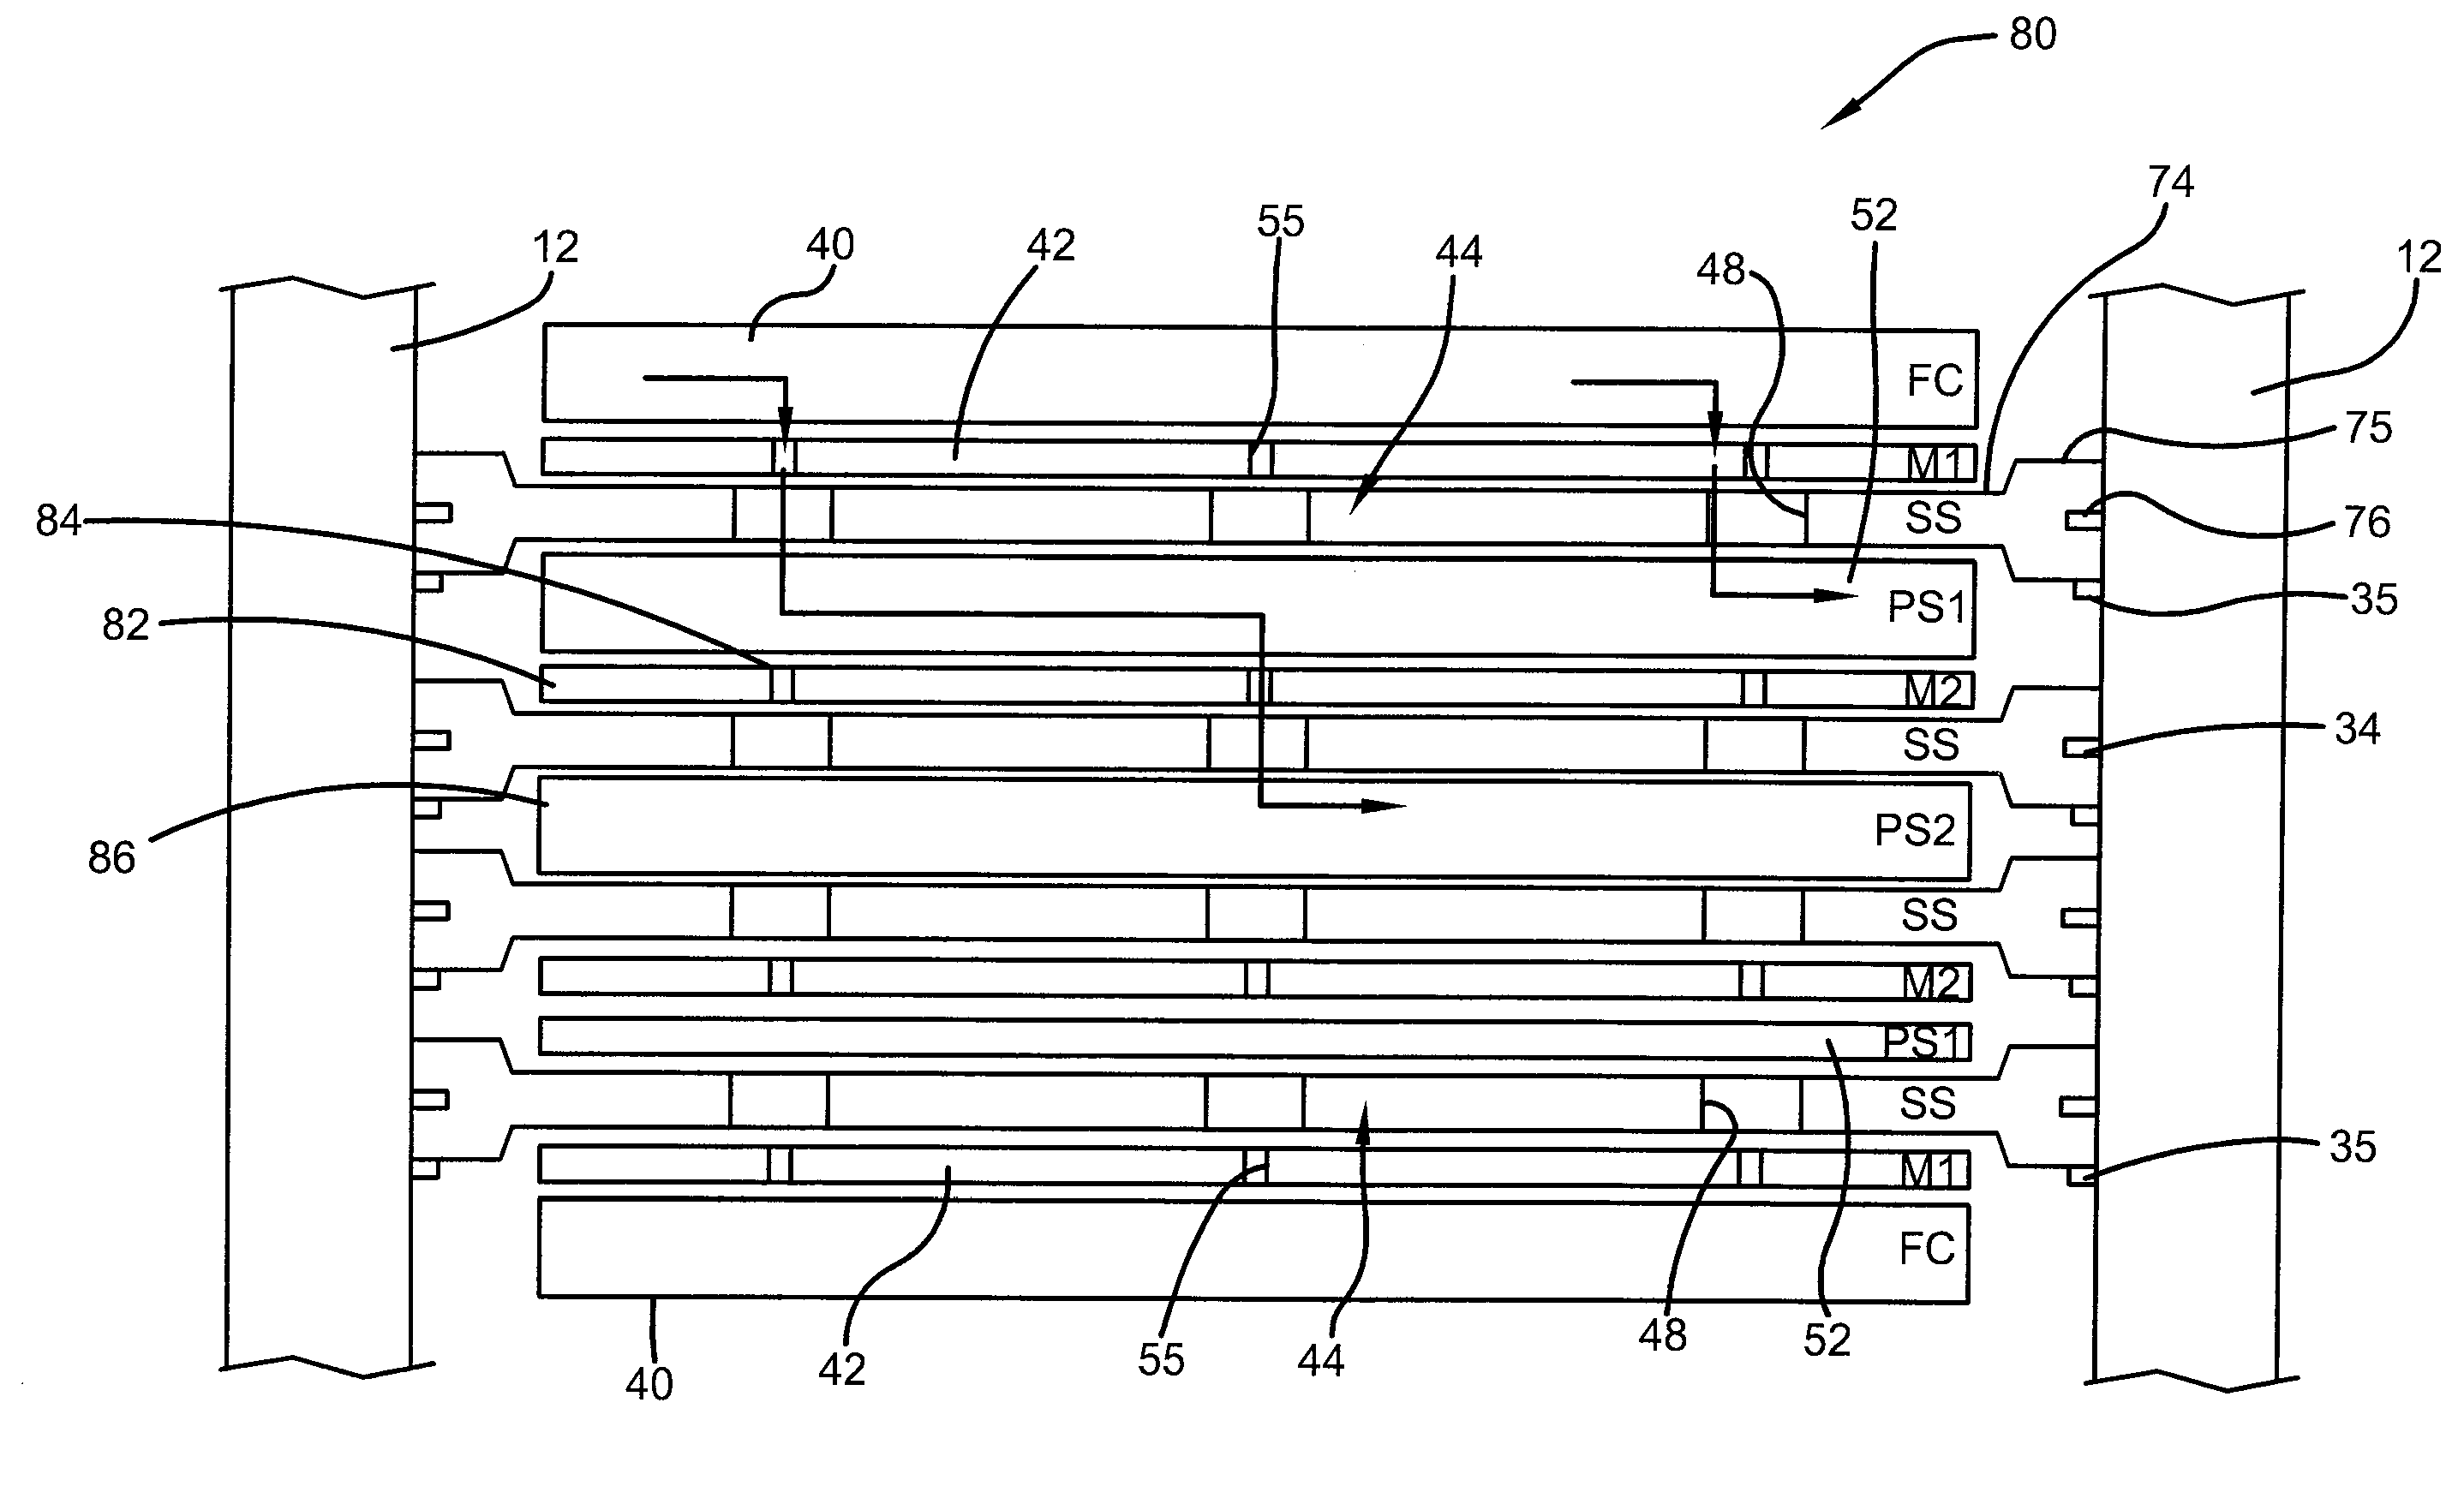 Planar filtration and selective isolation and recovery device